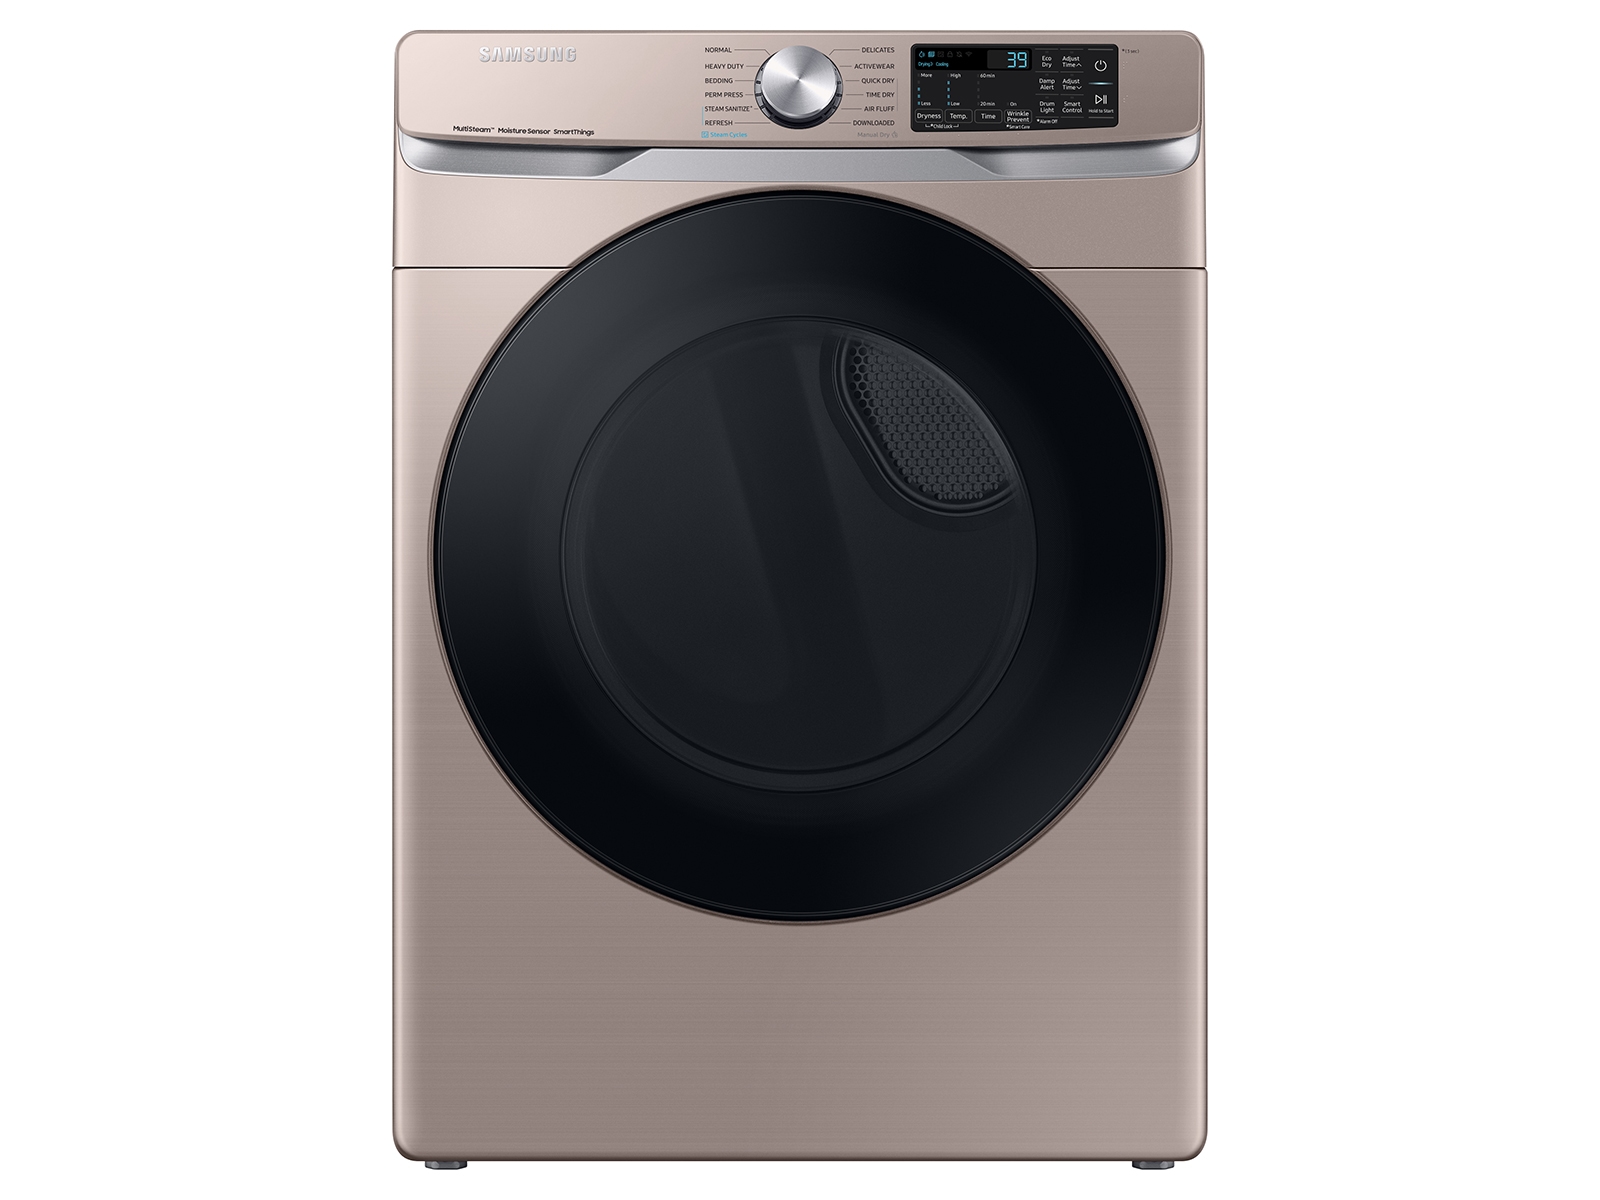 Samsung 7.5 cu. ft. Smart Electric Dryer with Steam Sanitize+ in Champagne(DVE45B6300C/A3)